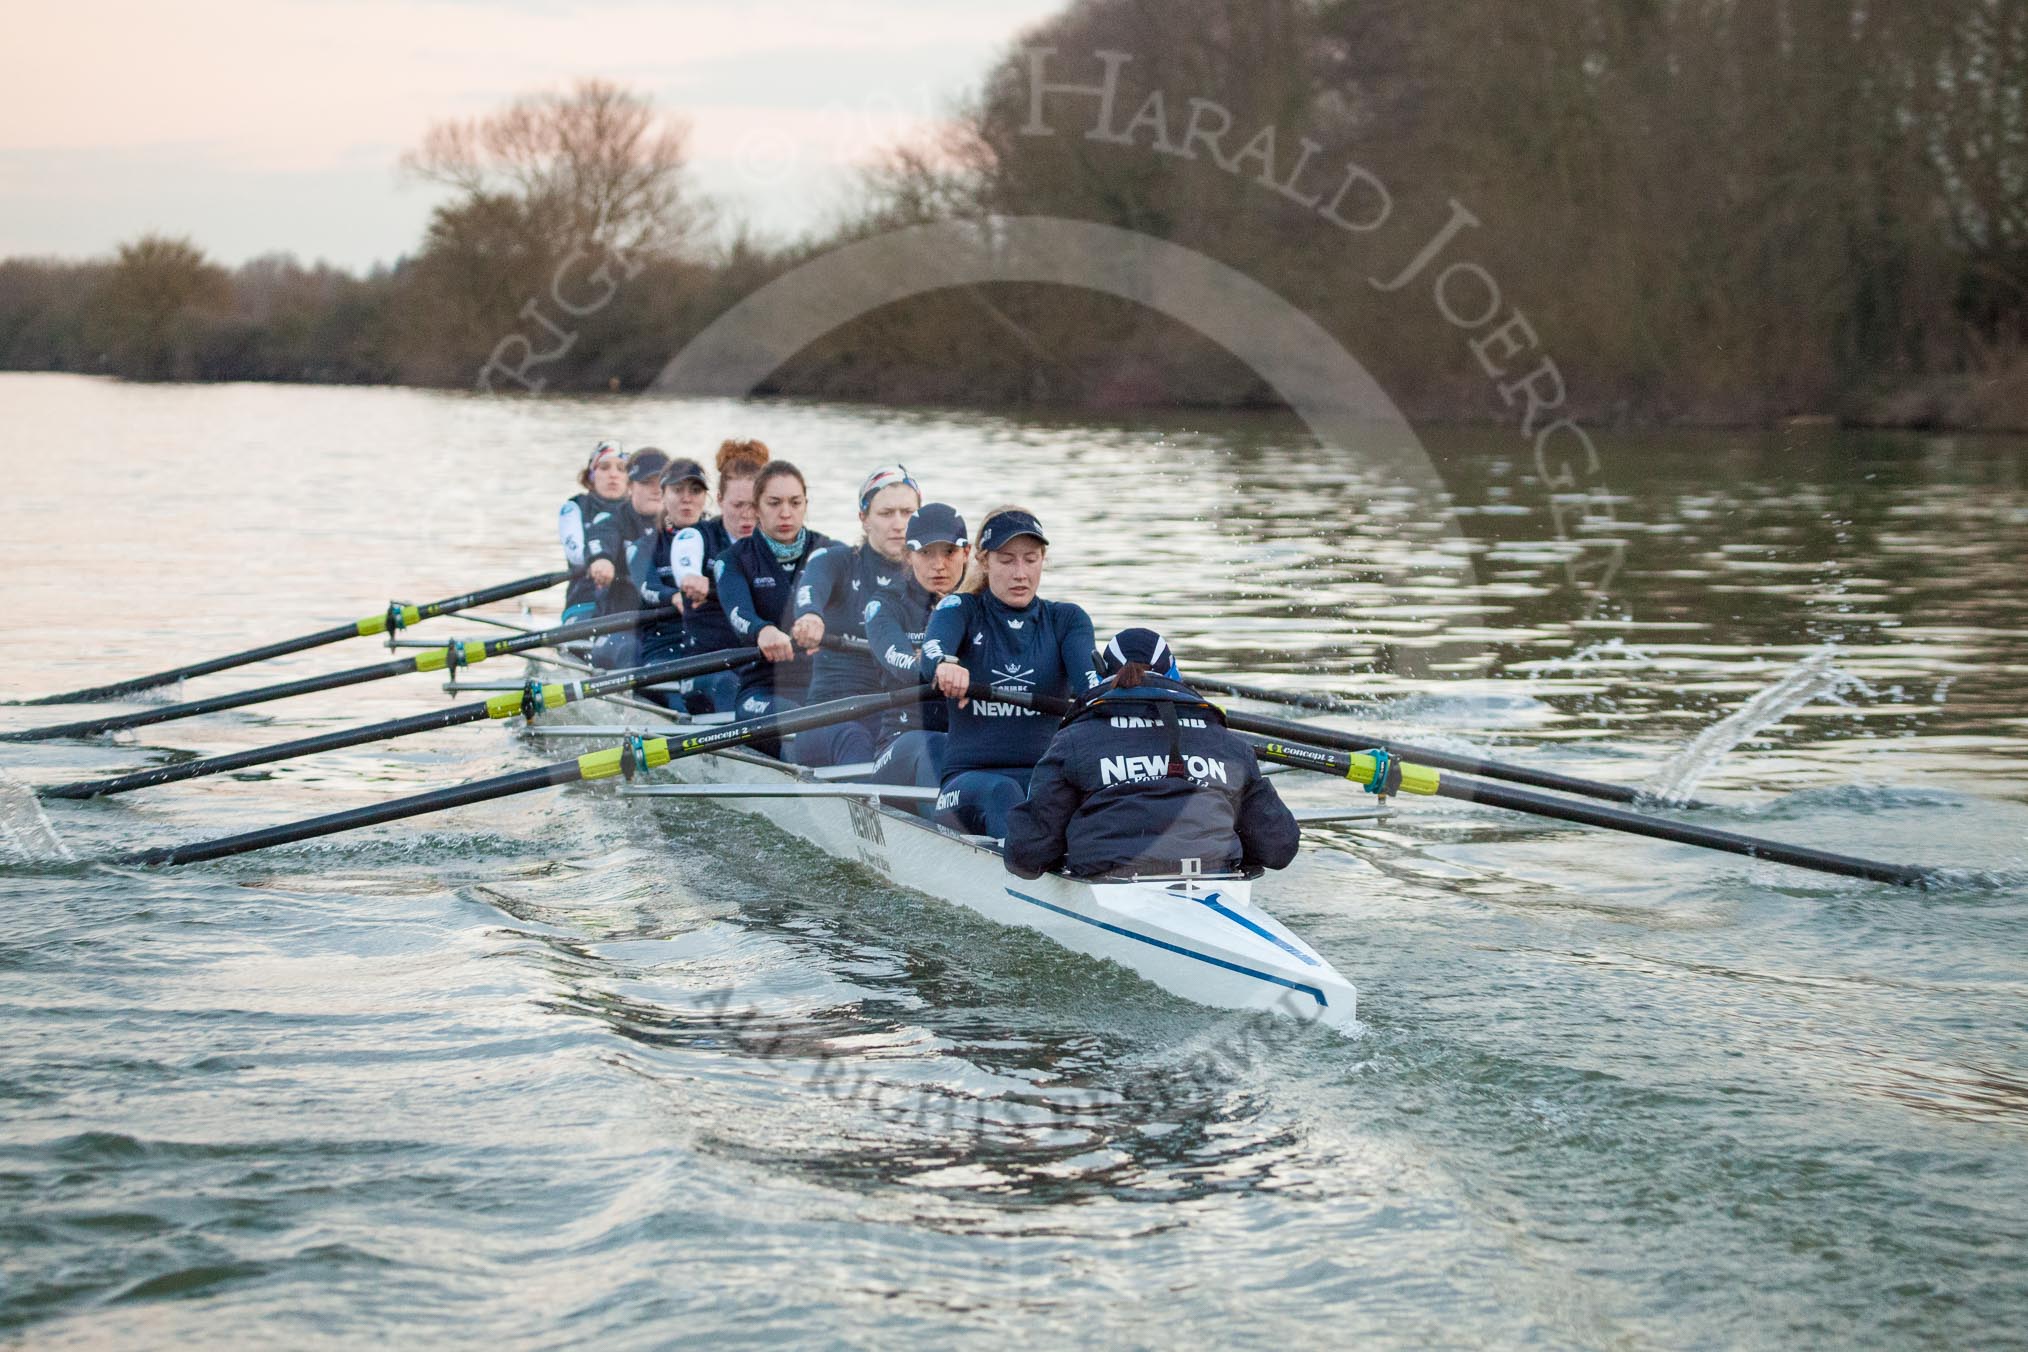 The Boat Race season 2013 - OUWBC training: In Osiris, the OUWBC reserve boat, bow Coralie Viollet-Djelassi, Elspeth Cumber, Hannah Ledbury, Eleanor Darlington, Rachel Purkess, Caitlin Goss, Annika Bruger, stroke Emily Chittock, and cox Sophie Shawdon..
River Thames,
Wallingford,
Oxfordshire,
United Kingdom,
on 13 March 2013 at 18:00, image #203